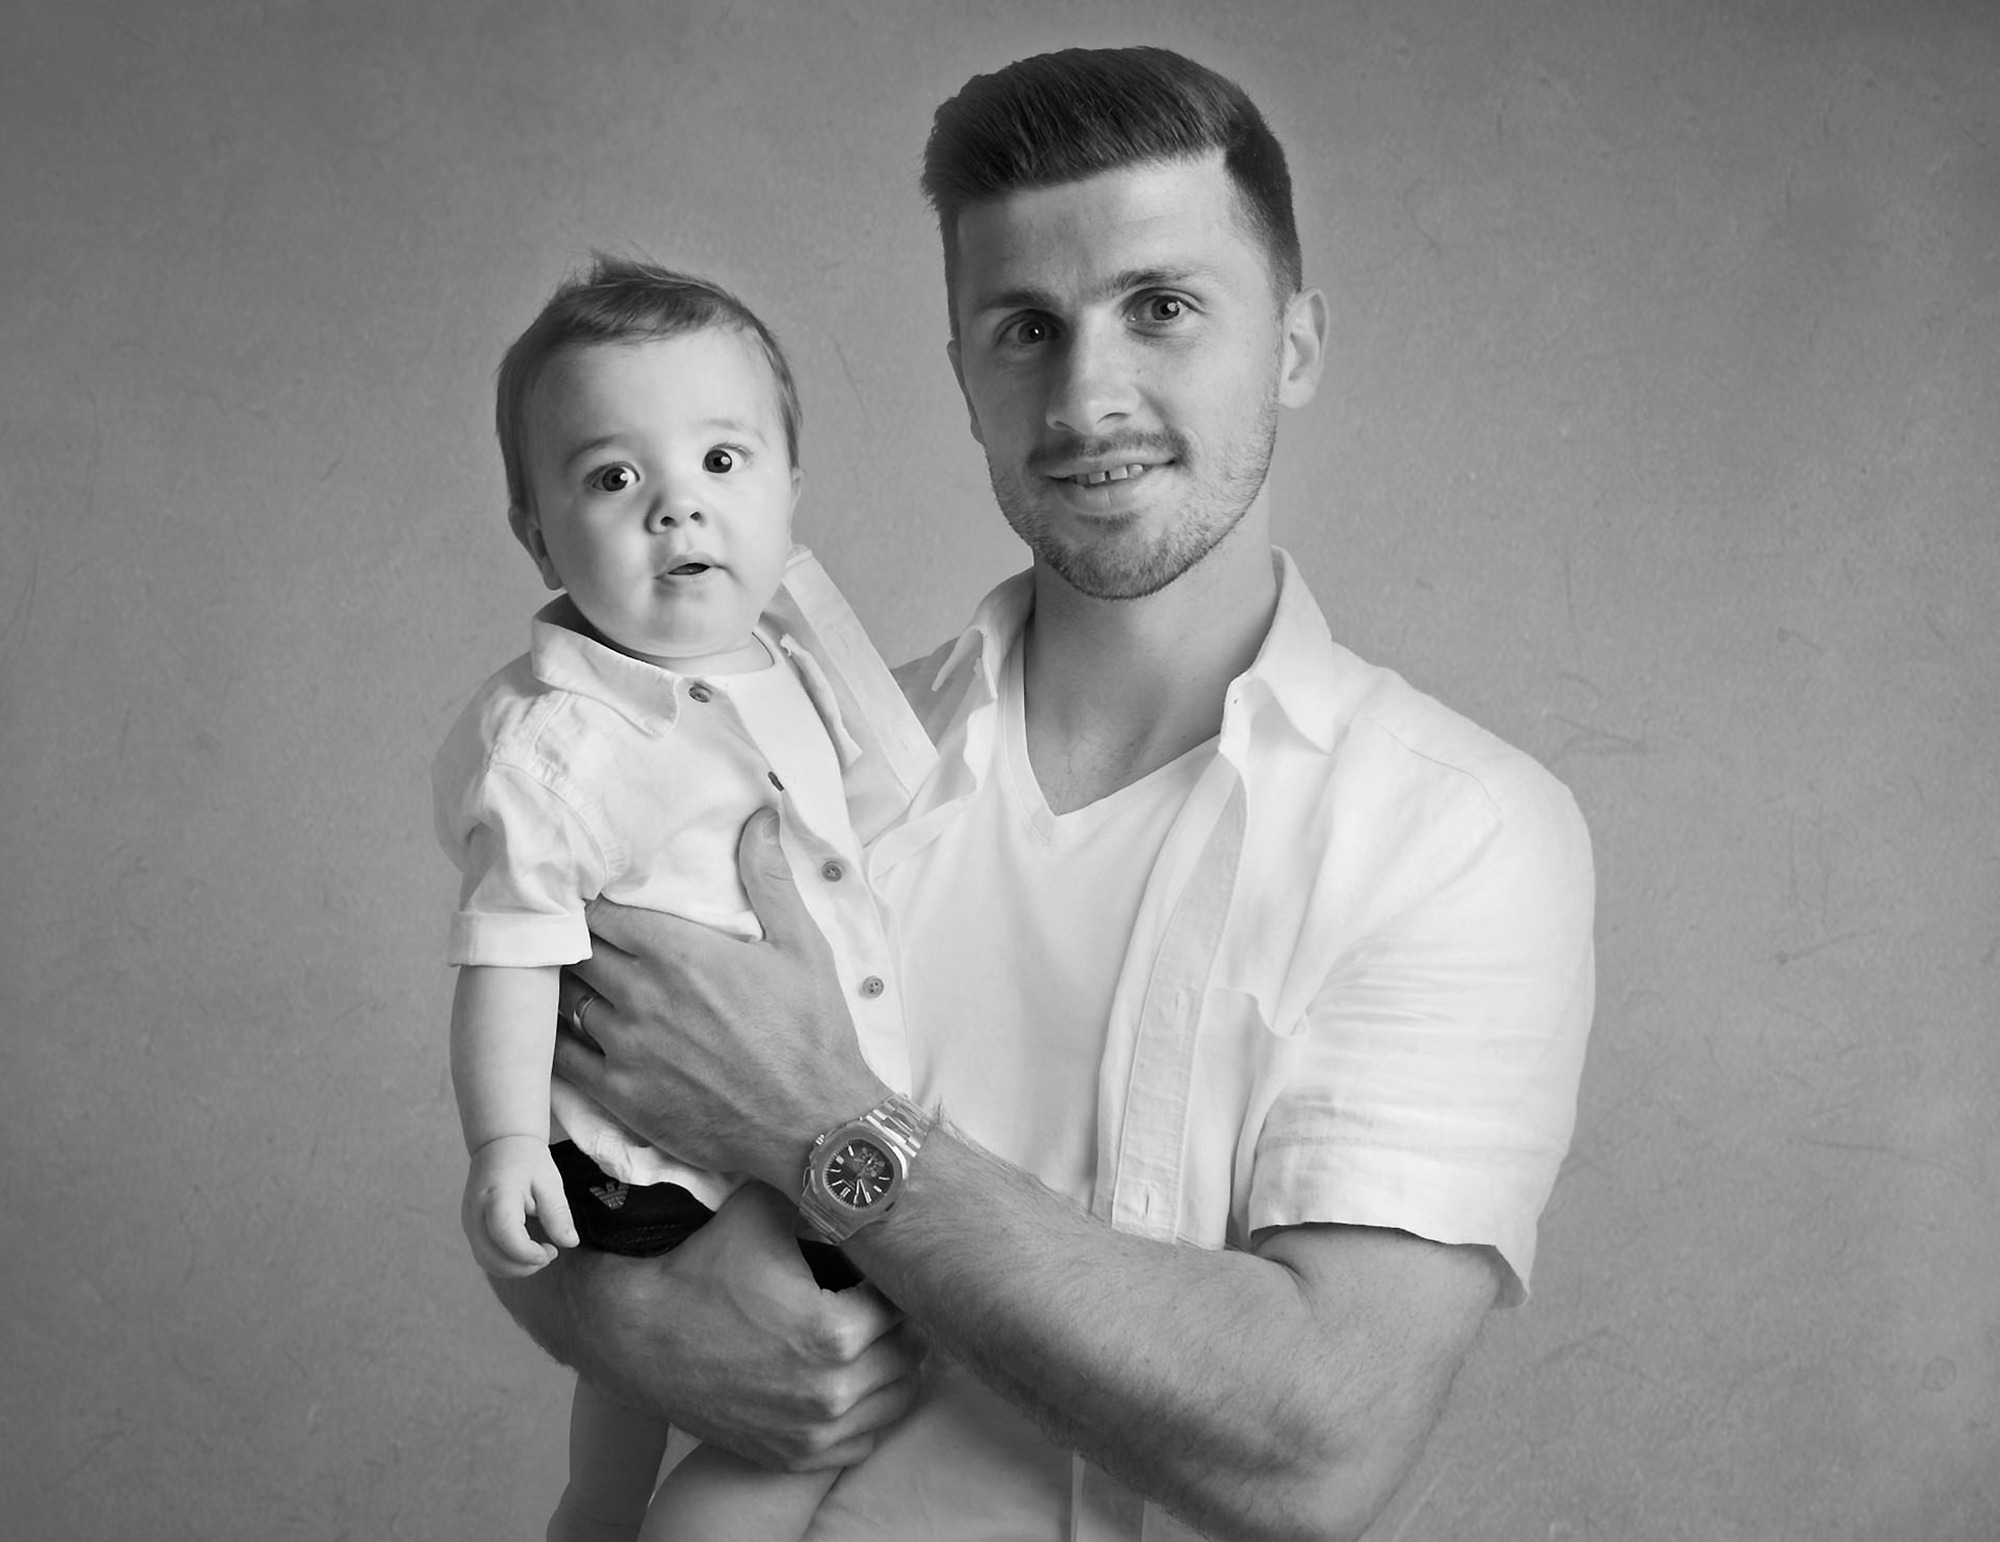 "Shane Long and his beautiful baby son portrait " 